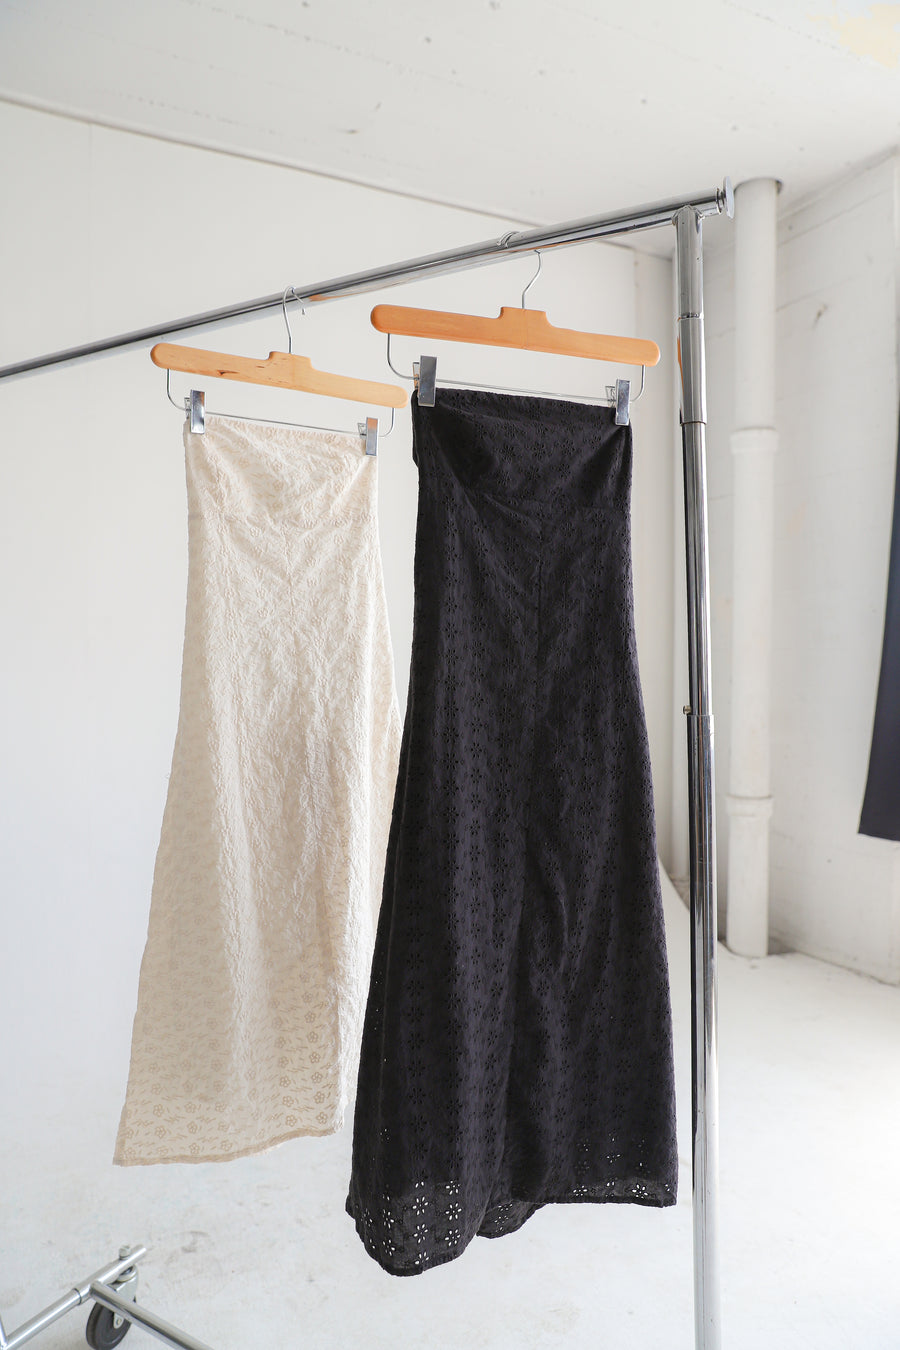 Two dresses hanging on clothing rack.